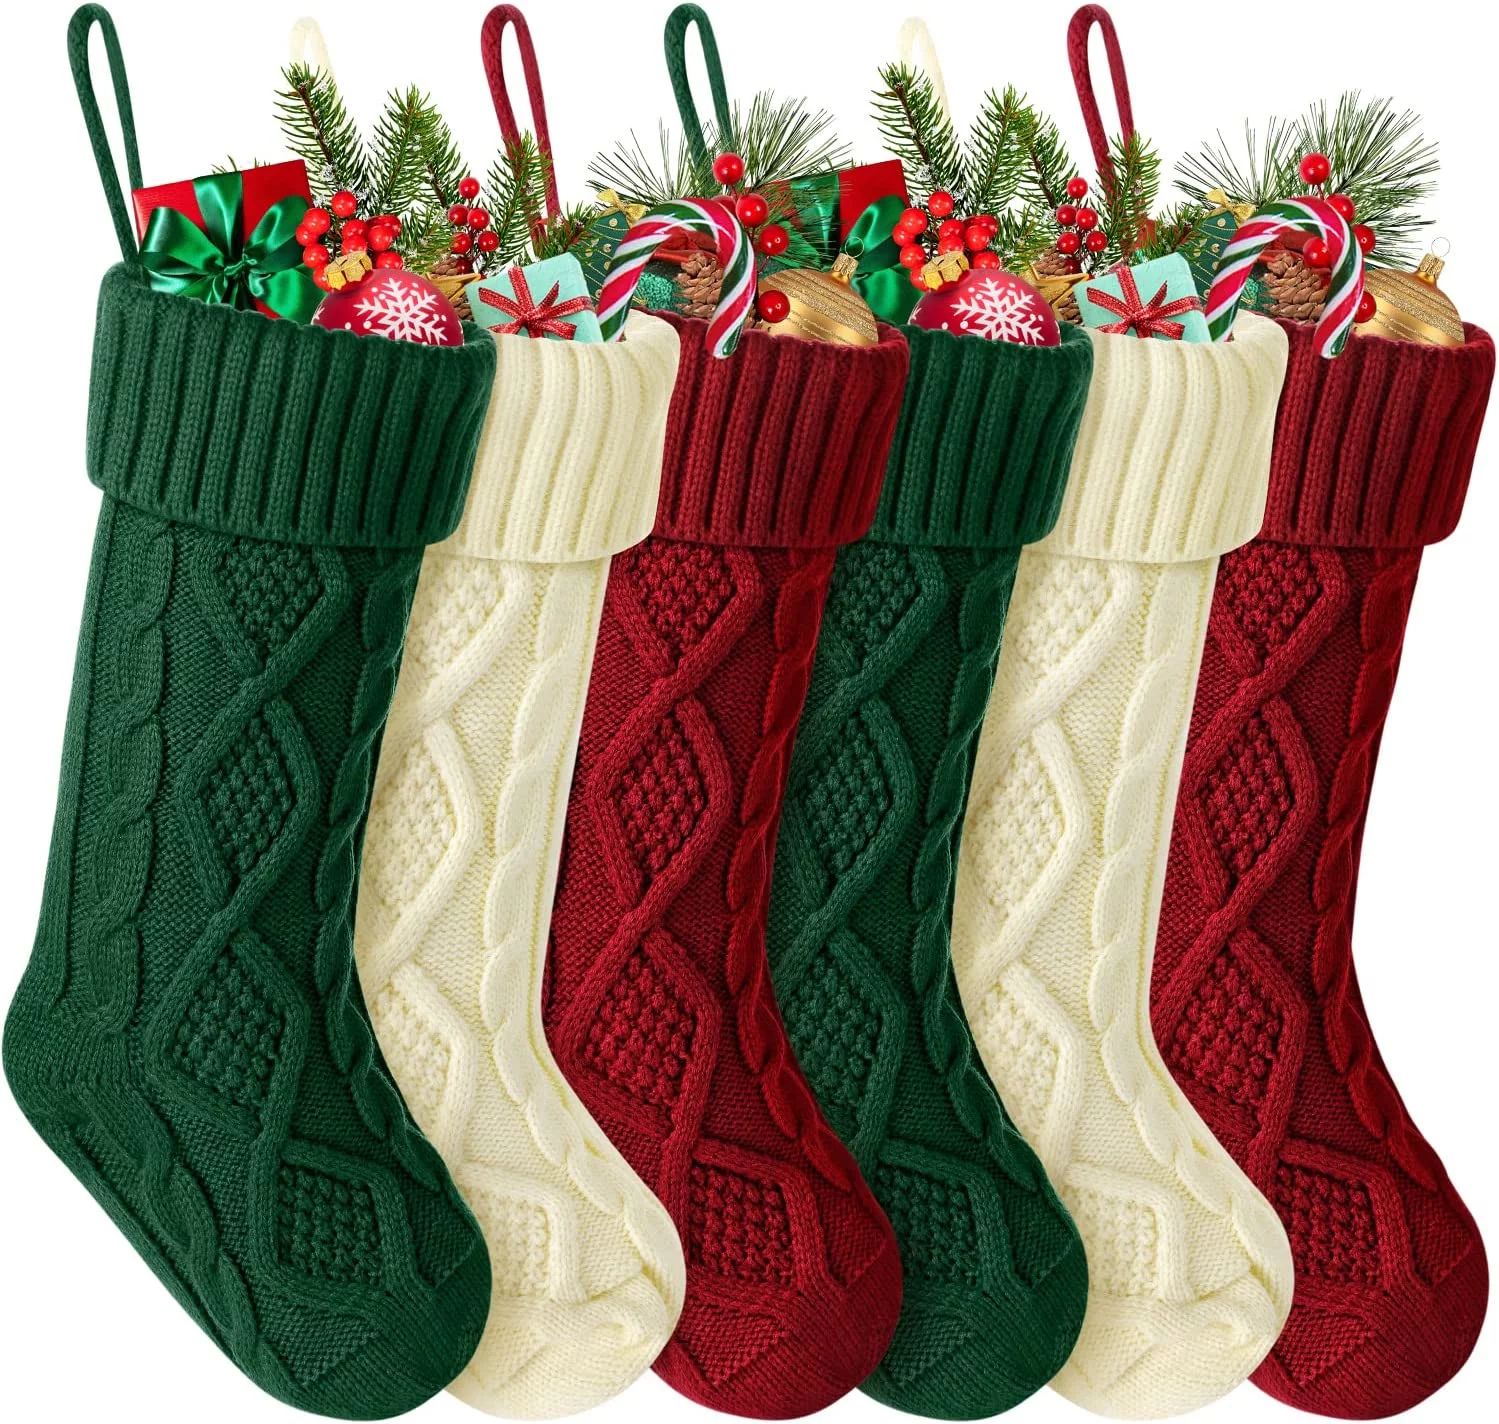 6pcs Christmas Stockings Large Knitted Xmas Stockings 18 Inches Fireplace Hanging Stockings for F... | Walmart (US)